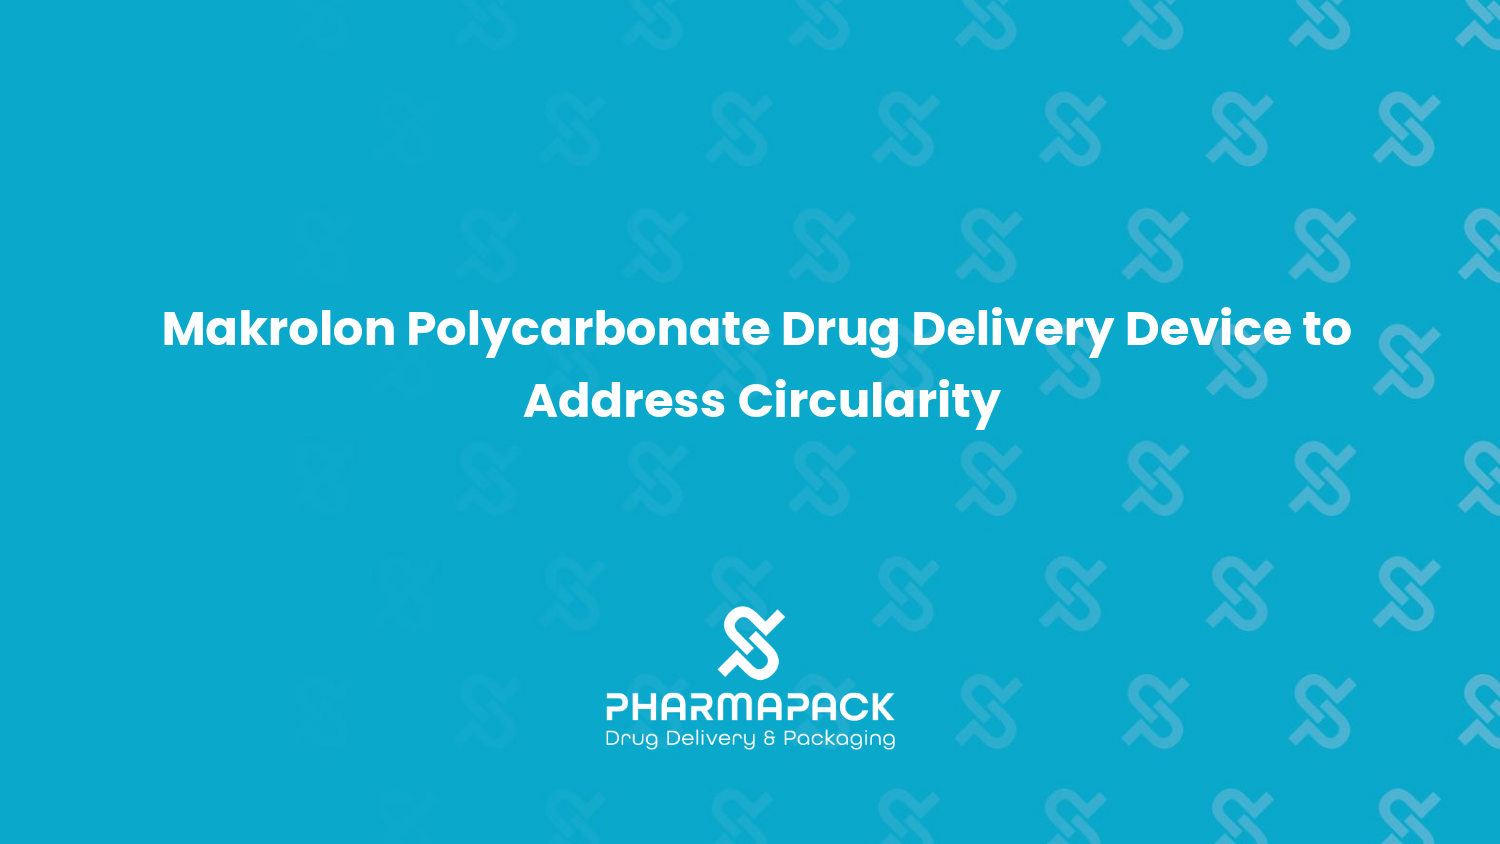 Makrolon® Polycarbonate Drug Delivery Device to Address Circularity